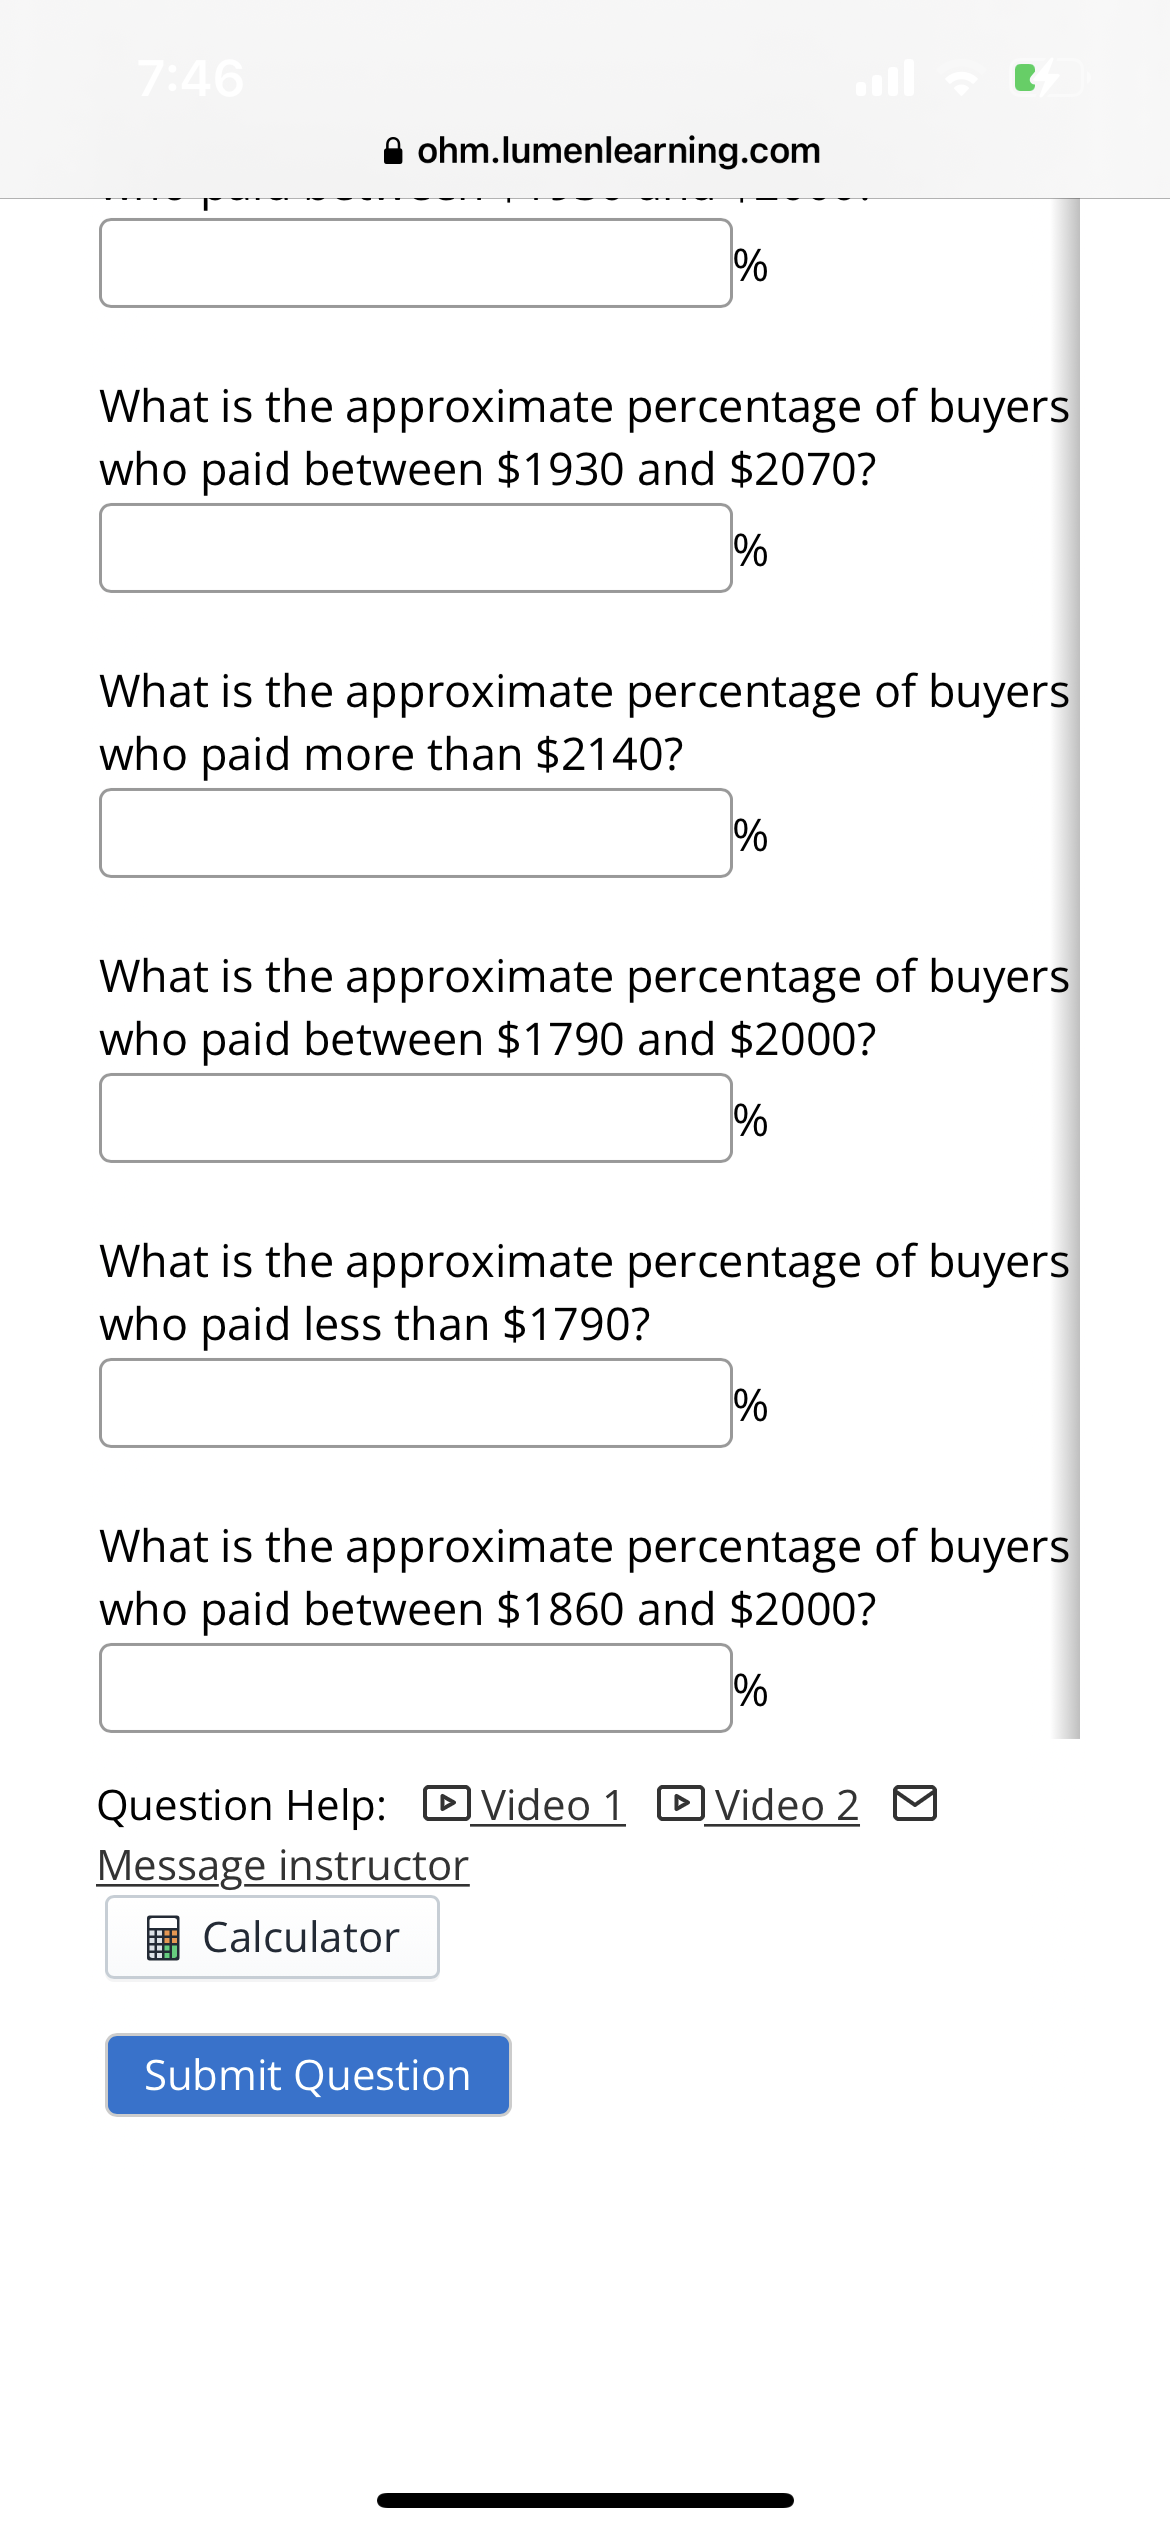 7:46
ohm.lumenlearning.com
What is the approximate percentage of buyers
who paid between $1930 and $2070?
%
%
What is the approximate percentage of buyers
who paid more than $2140?
What is the approximate percentage of buyers
who paid between $1790 and $2000?
%
%
What is the approximate percentage of buyers
who paid less than $1790?
Calculator
What is the approximate percentage of buyers
who paid between $1860 and $2000?
%
Submit Question
%
Question Help: Video 1 Video 2
Message instructor